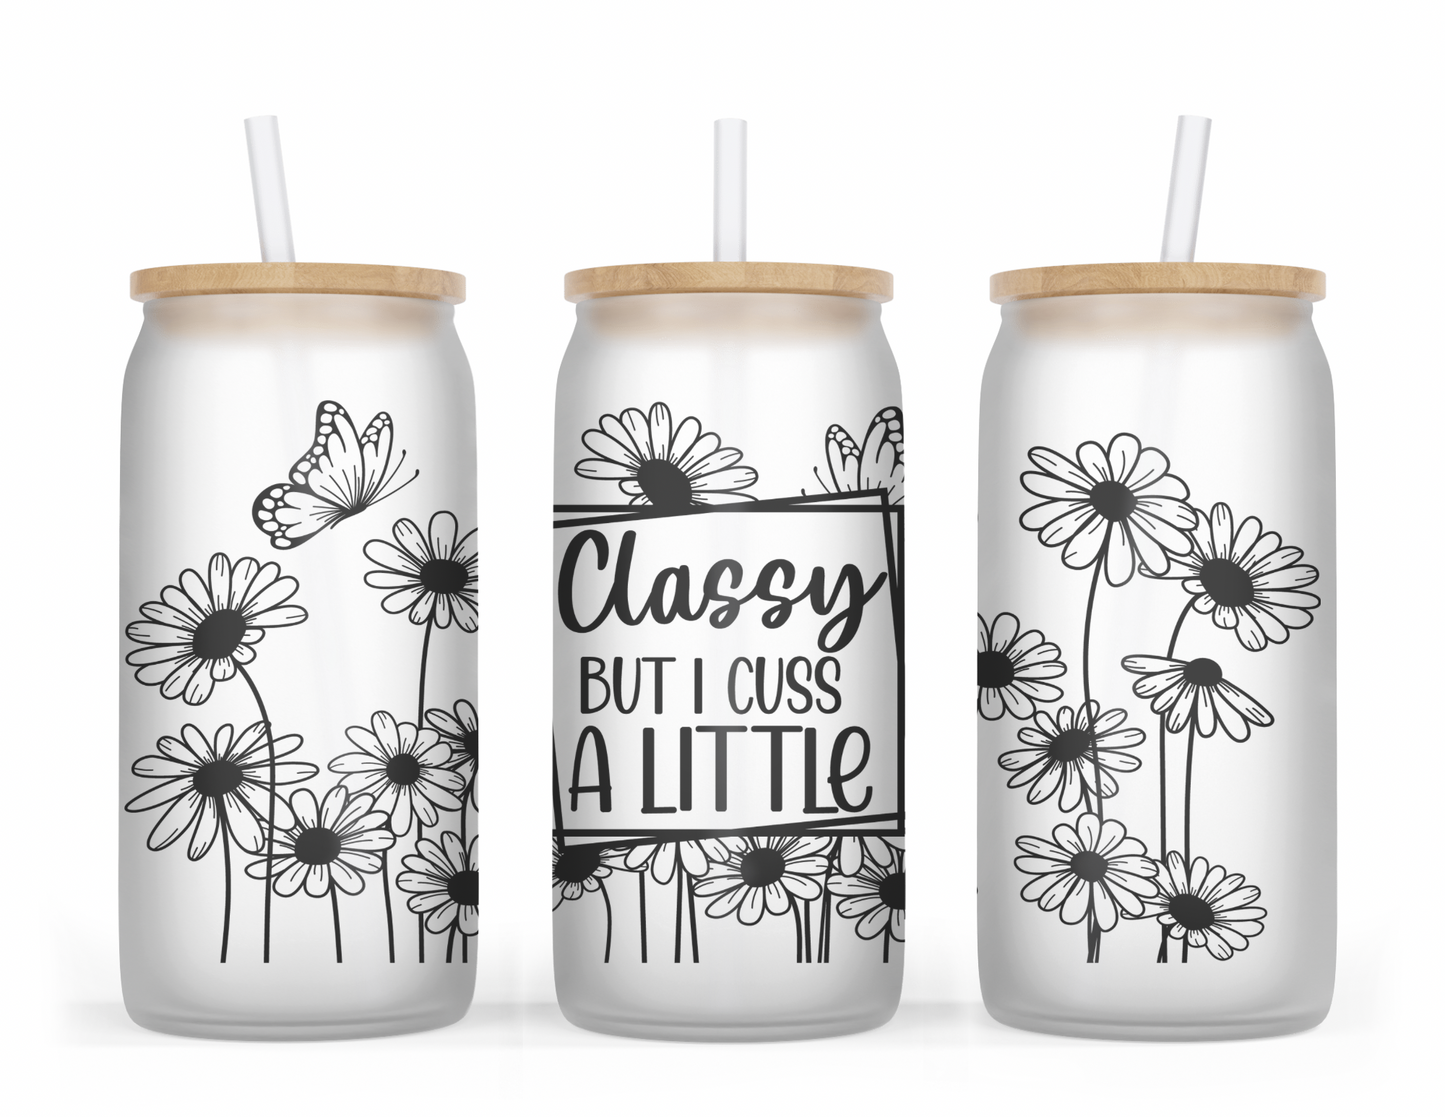 Classy But I Cuss A Little 16oz Frosted Glass Cup